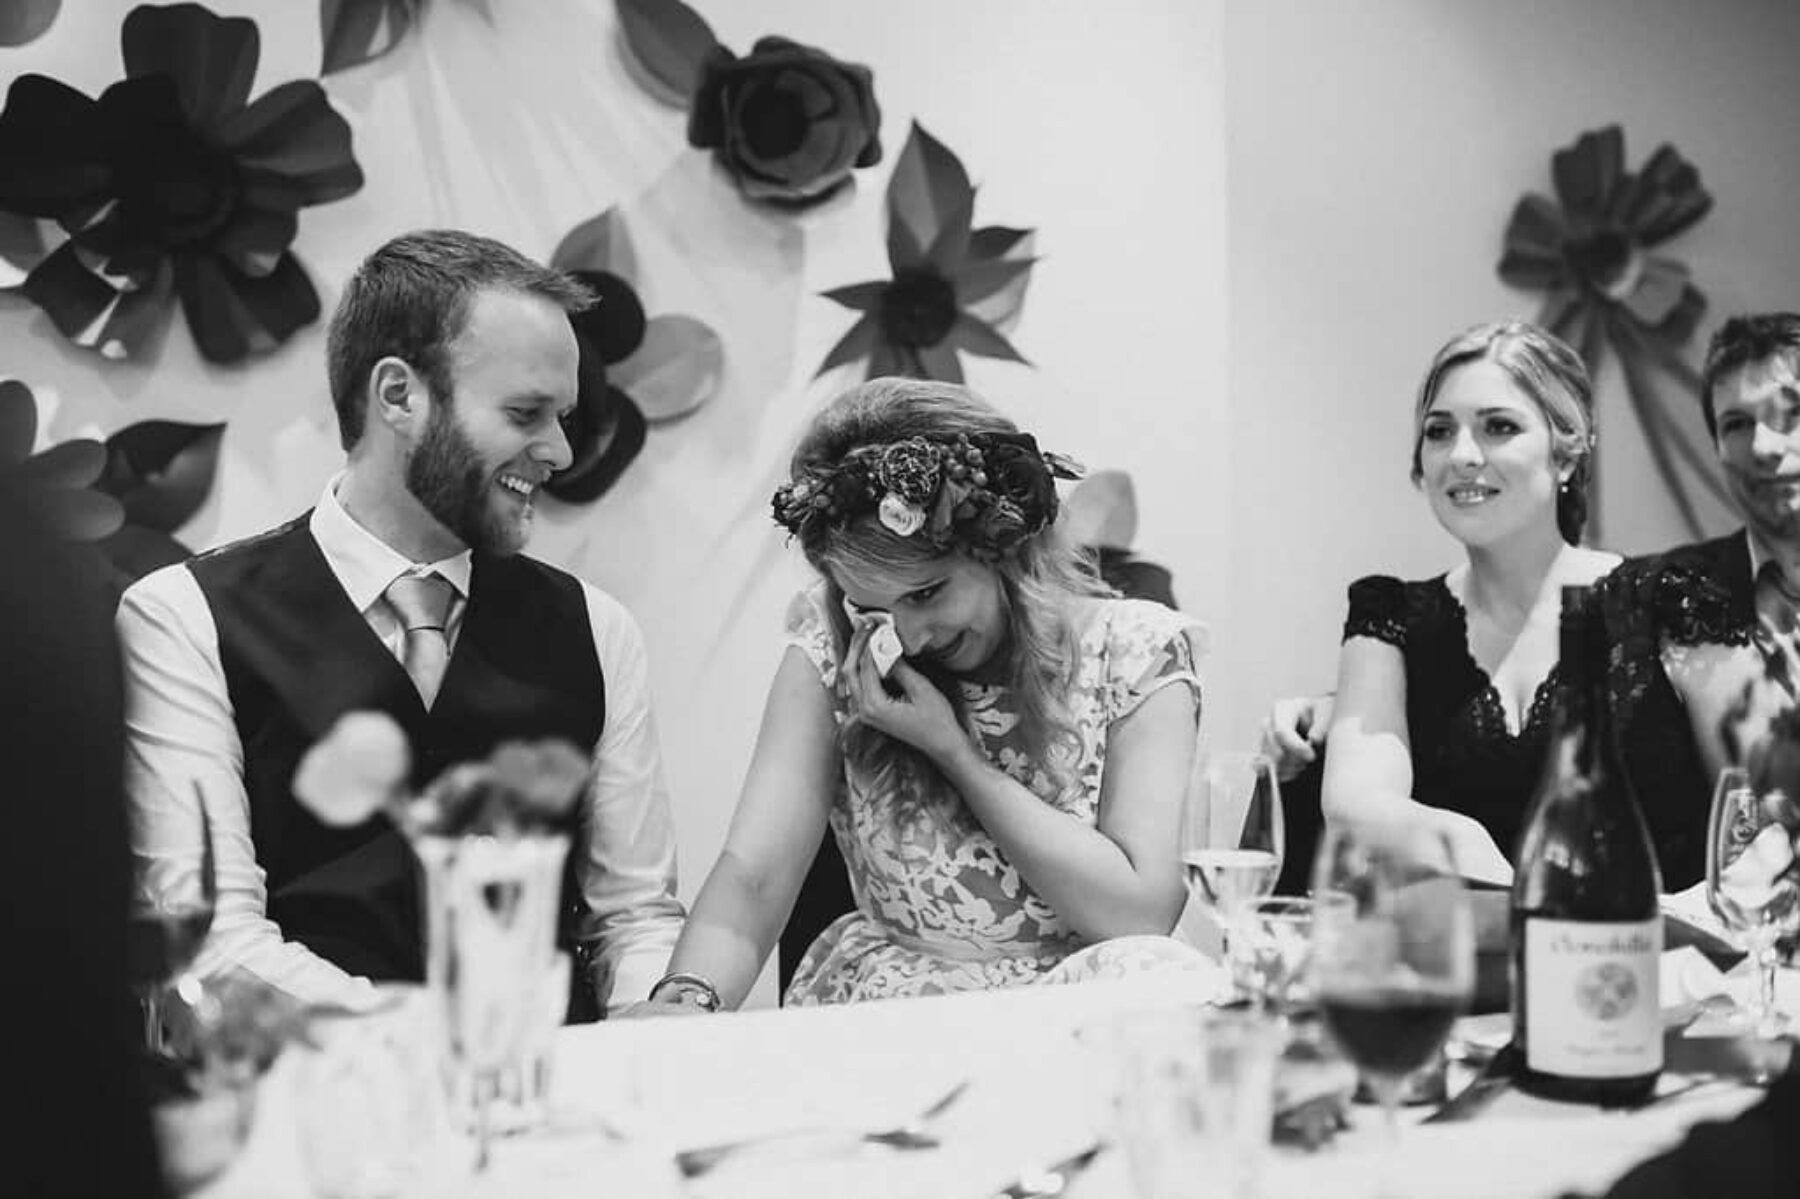 Chilled vintage wedding at Grazing at Gundaroo - Kelly Tunney Photography